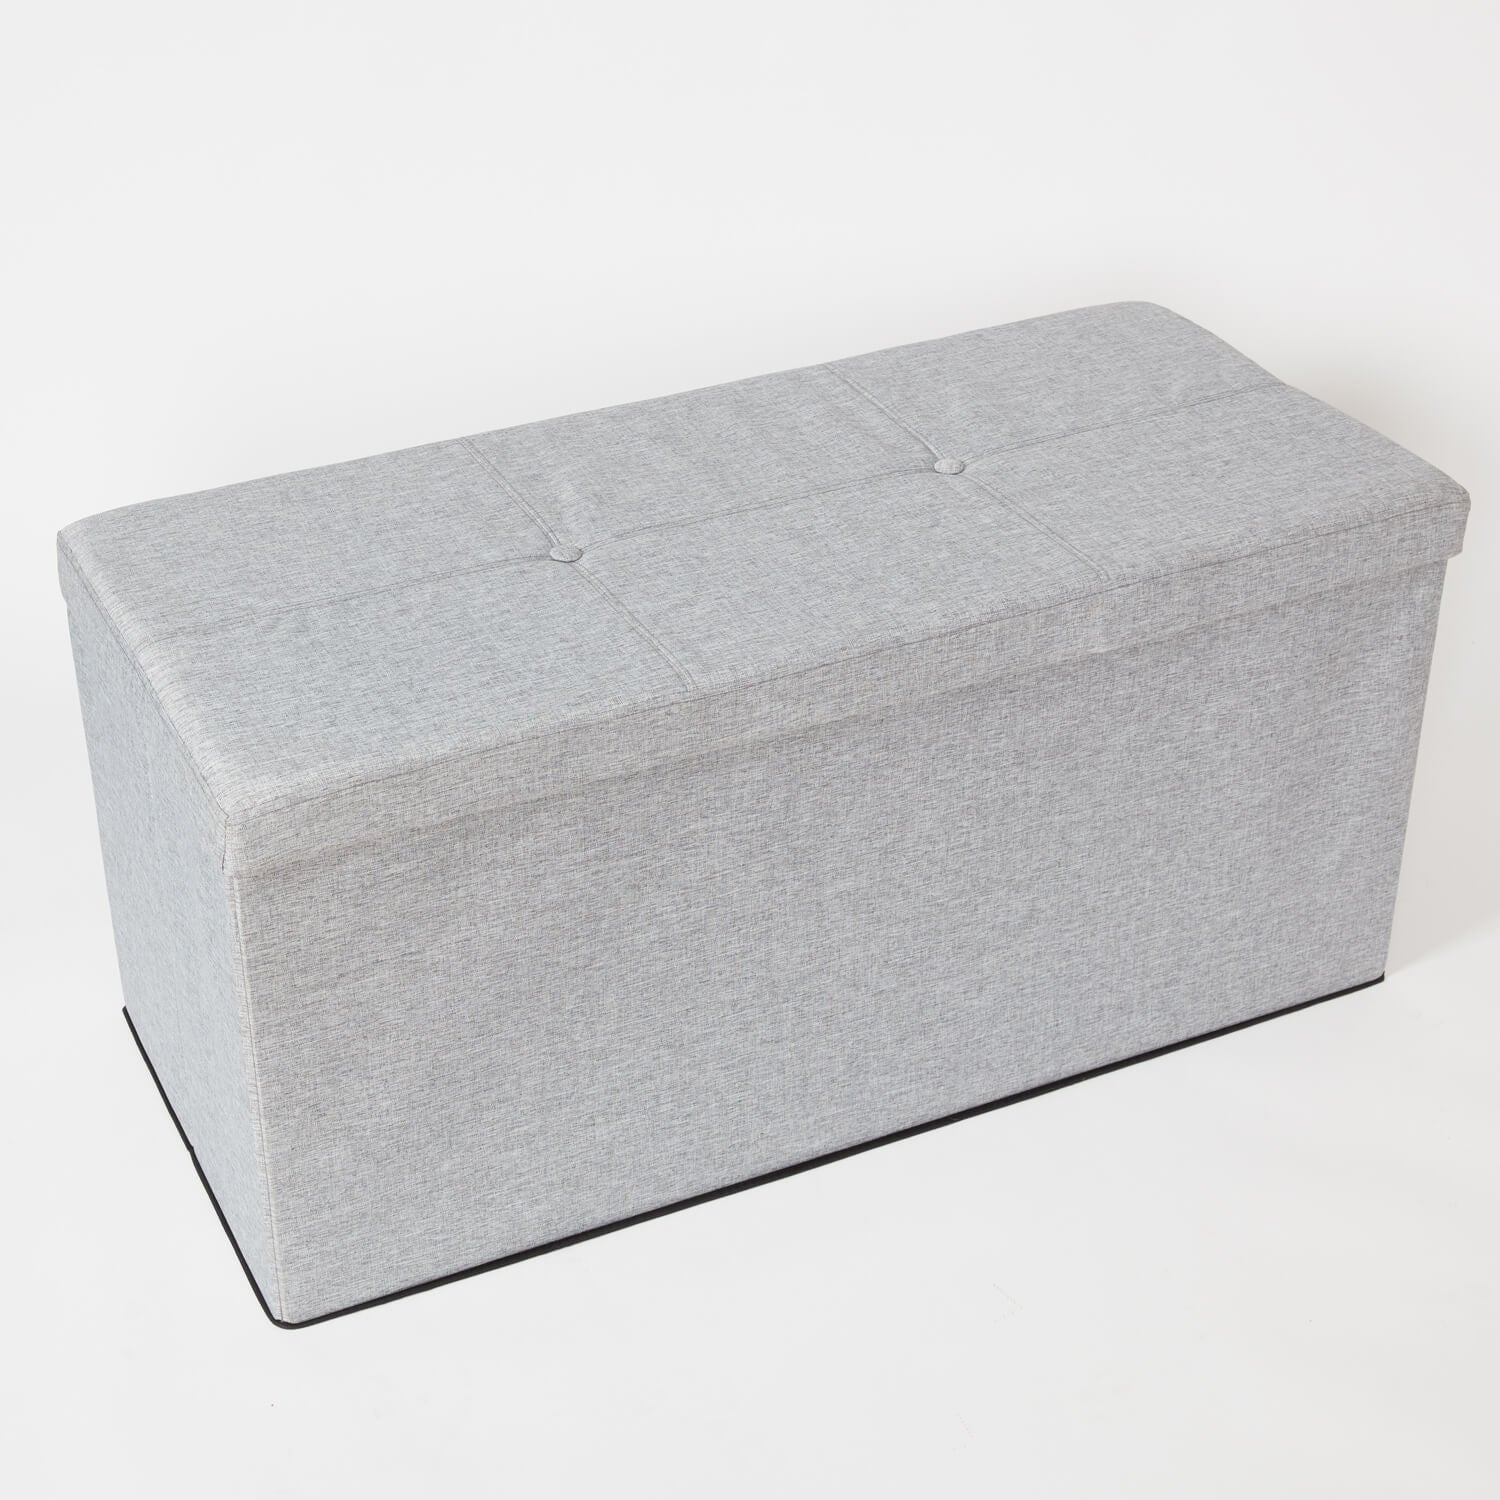 Oversized Collapsible Ottoman with Tray Top | Storage